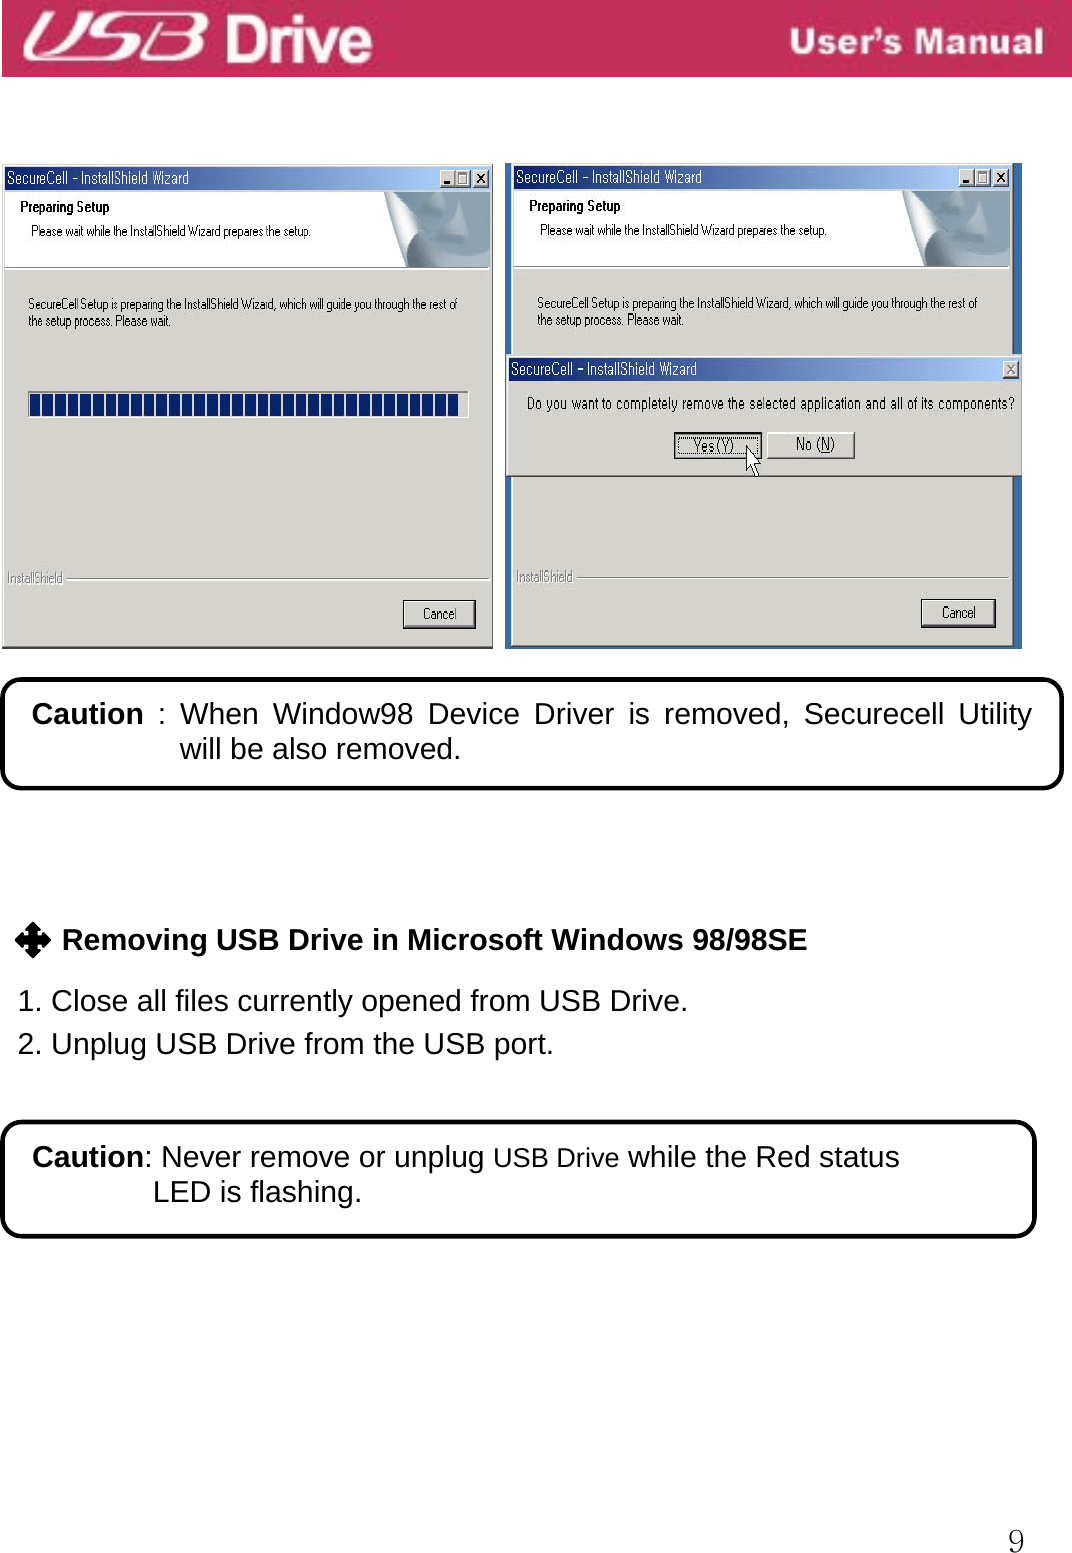  9              Removing USB Drive in Microsoft Windows 98/98SE  1. Close all files currently opened from USB Drive. 2. Unplug USB Drive from the USB port.           Caution: Never remove or unplug USB Drive while the Red status LED is flashing.  Caution : When Window98 Device Driver is removed, Securecell Utility will be also removed. 